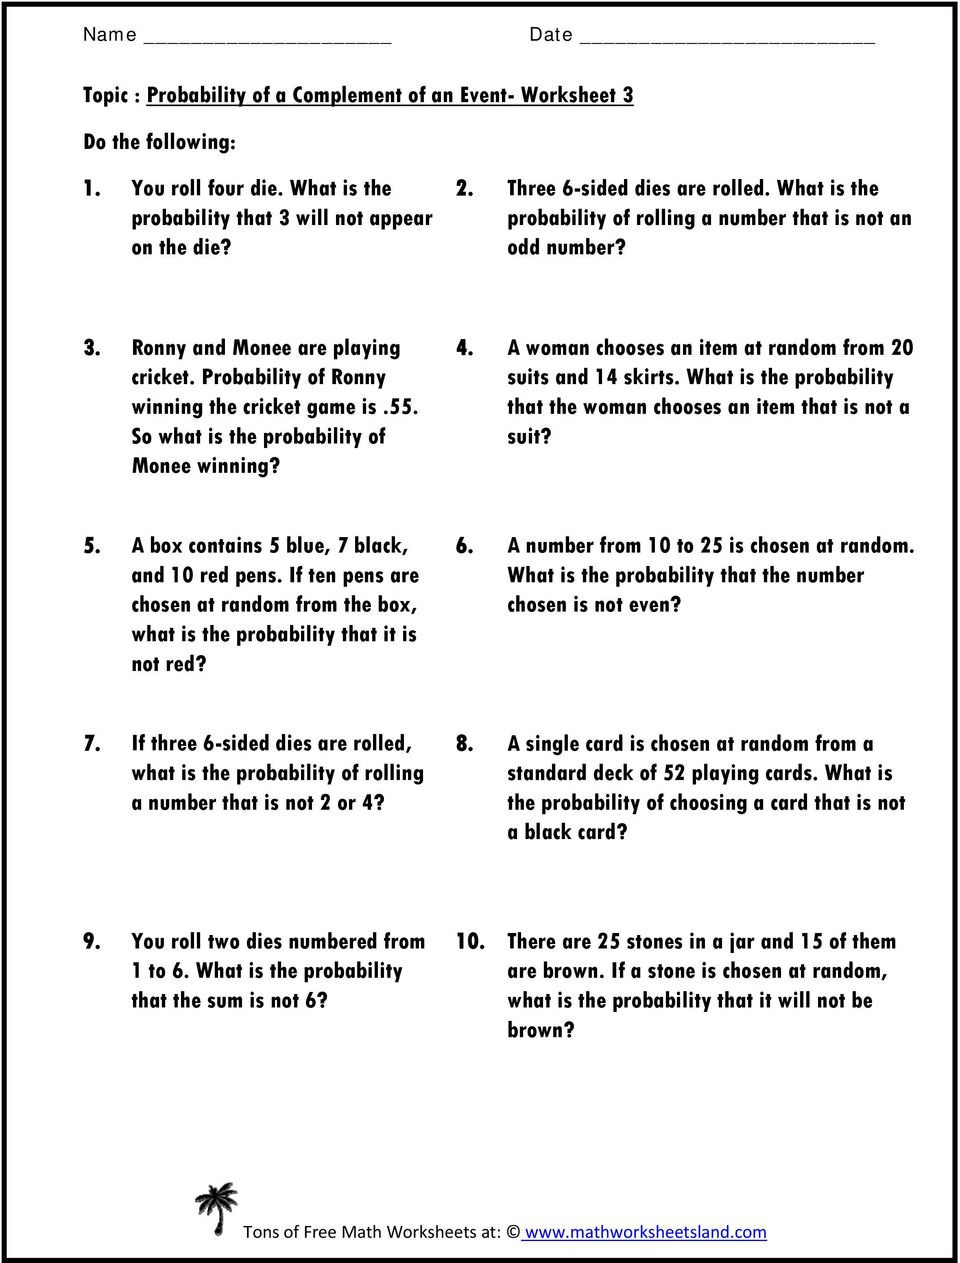 Simple Probability Worksheet Pdf topic Probability Of A Plement Of An event Worksheet 1